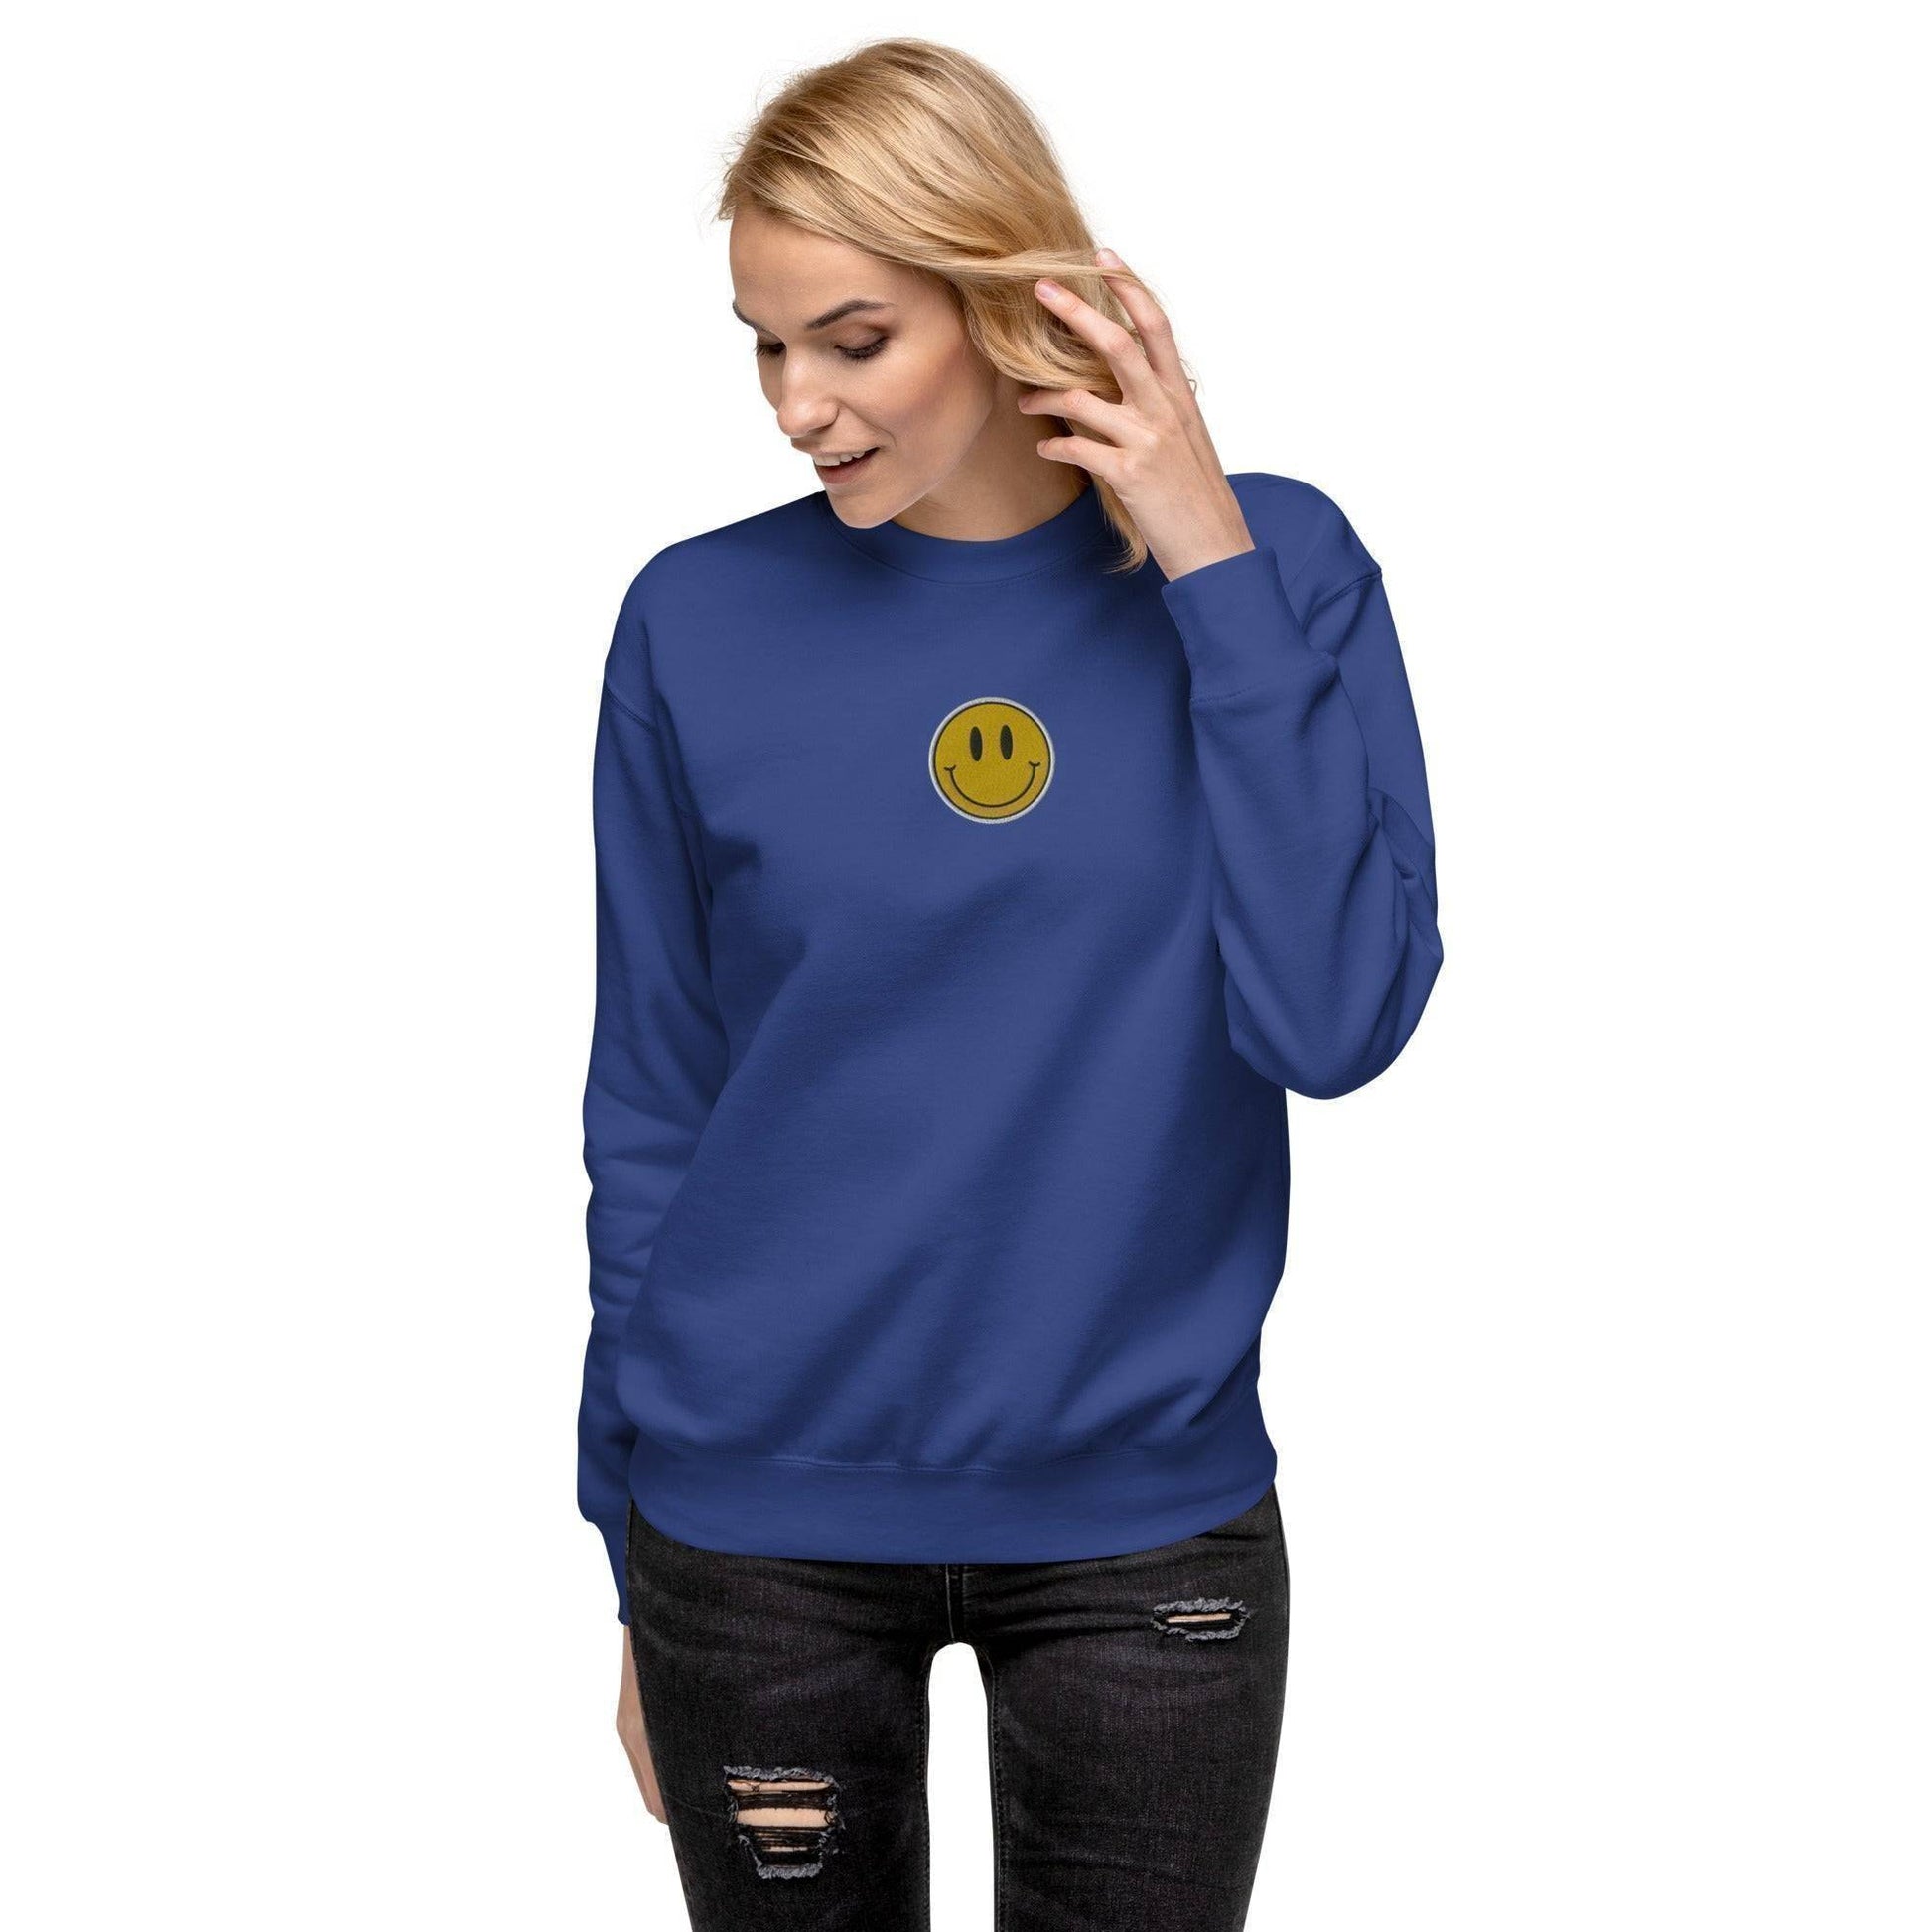 You Should Smile More Embroidered Sweatshirt Team Royal